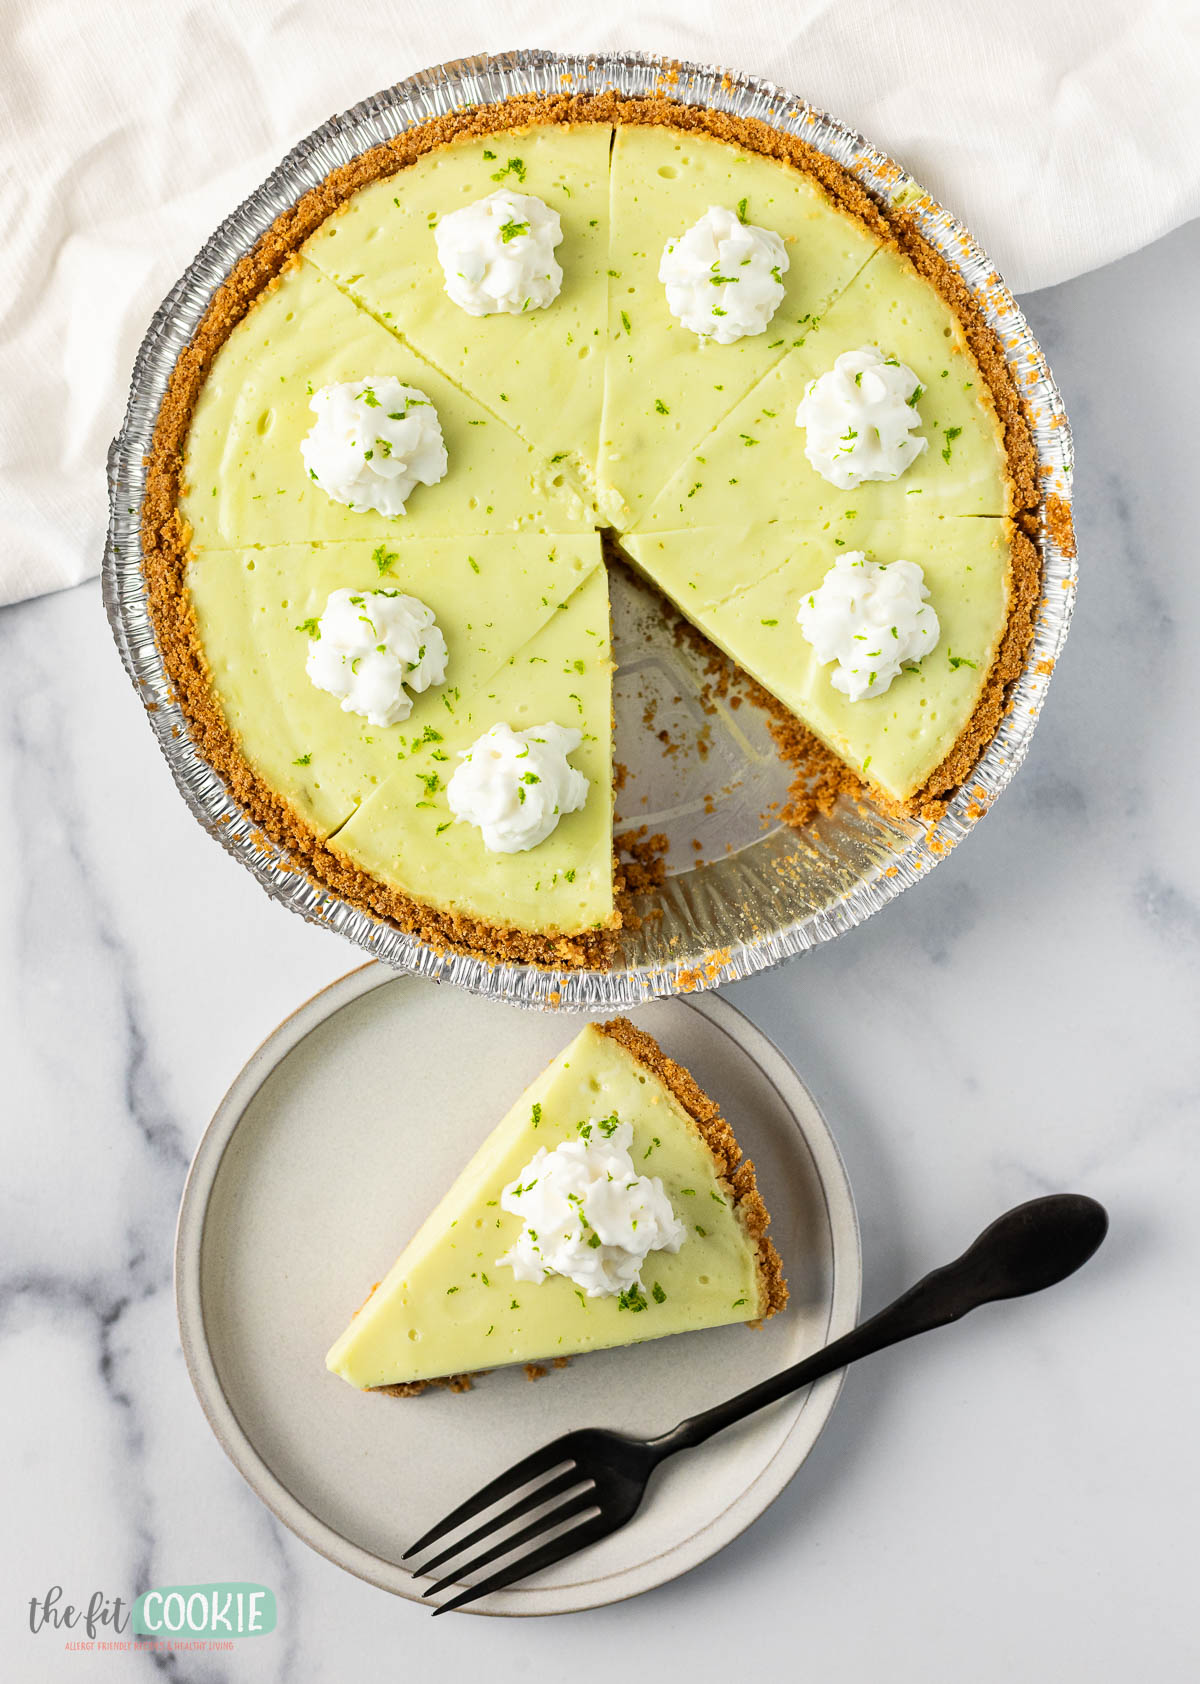 A key lime pie with a single slice served on a plate, topped with whipped cream and lime zest.